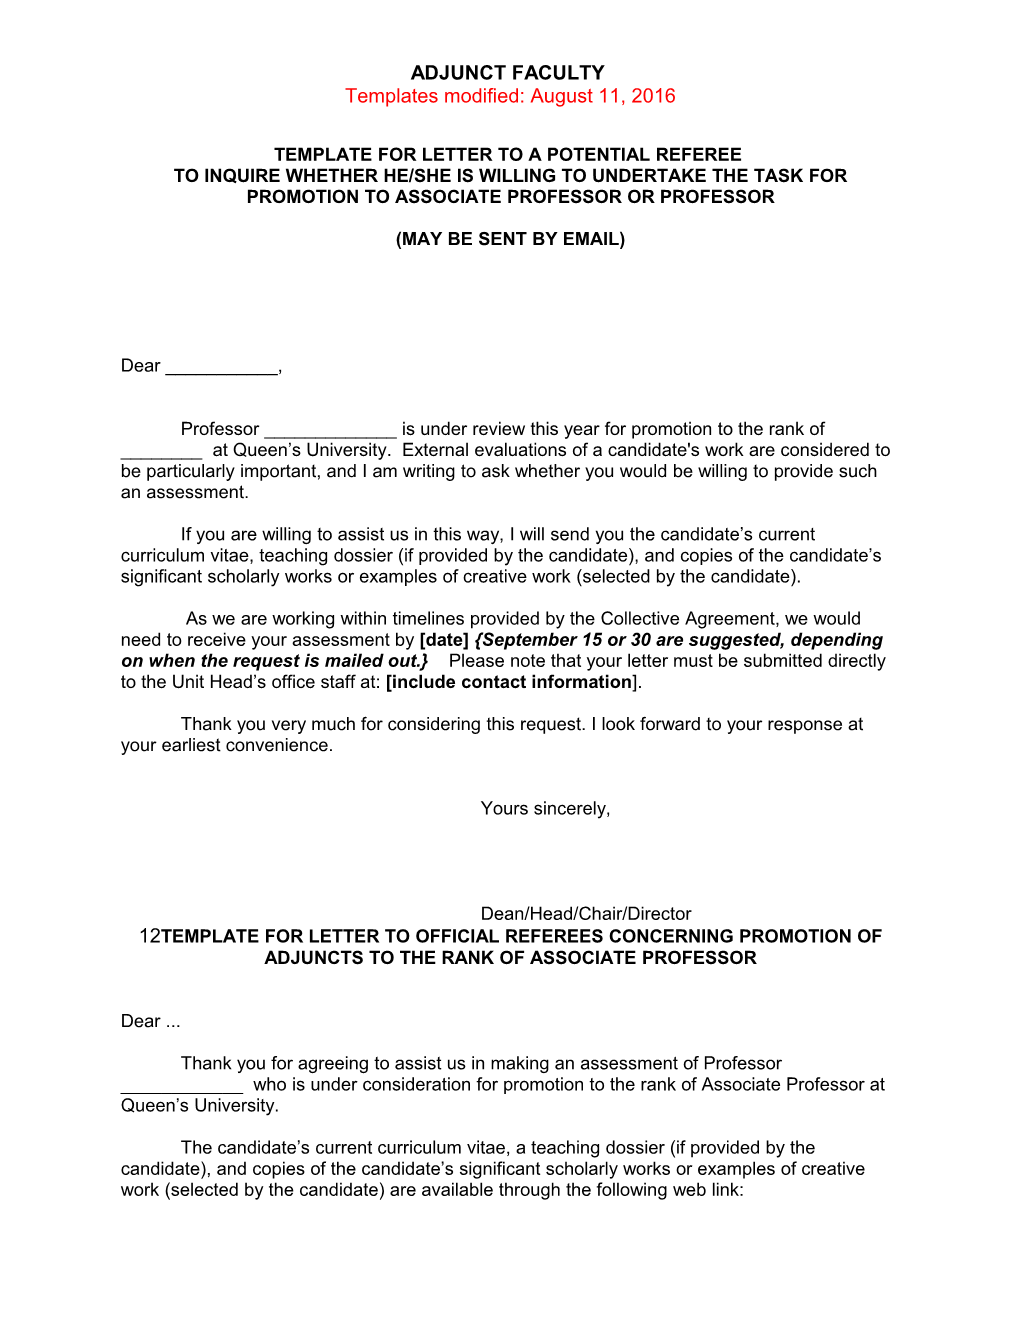 Template for Letter to External Referees Concerning Renewal of Appointment